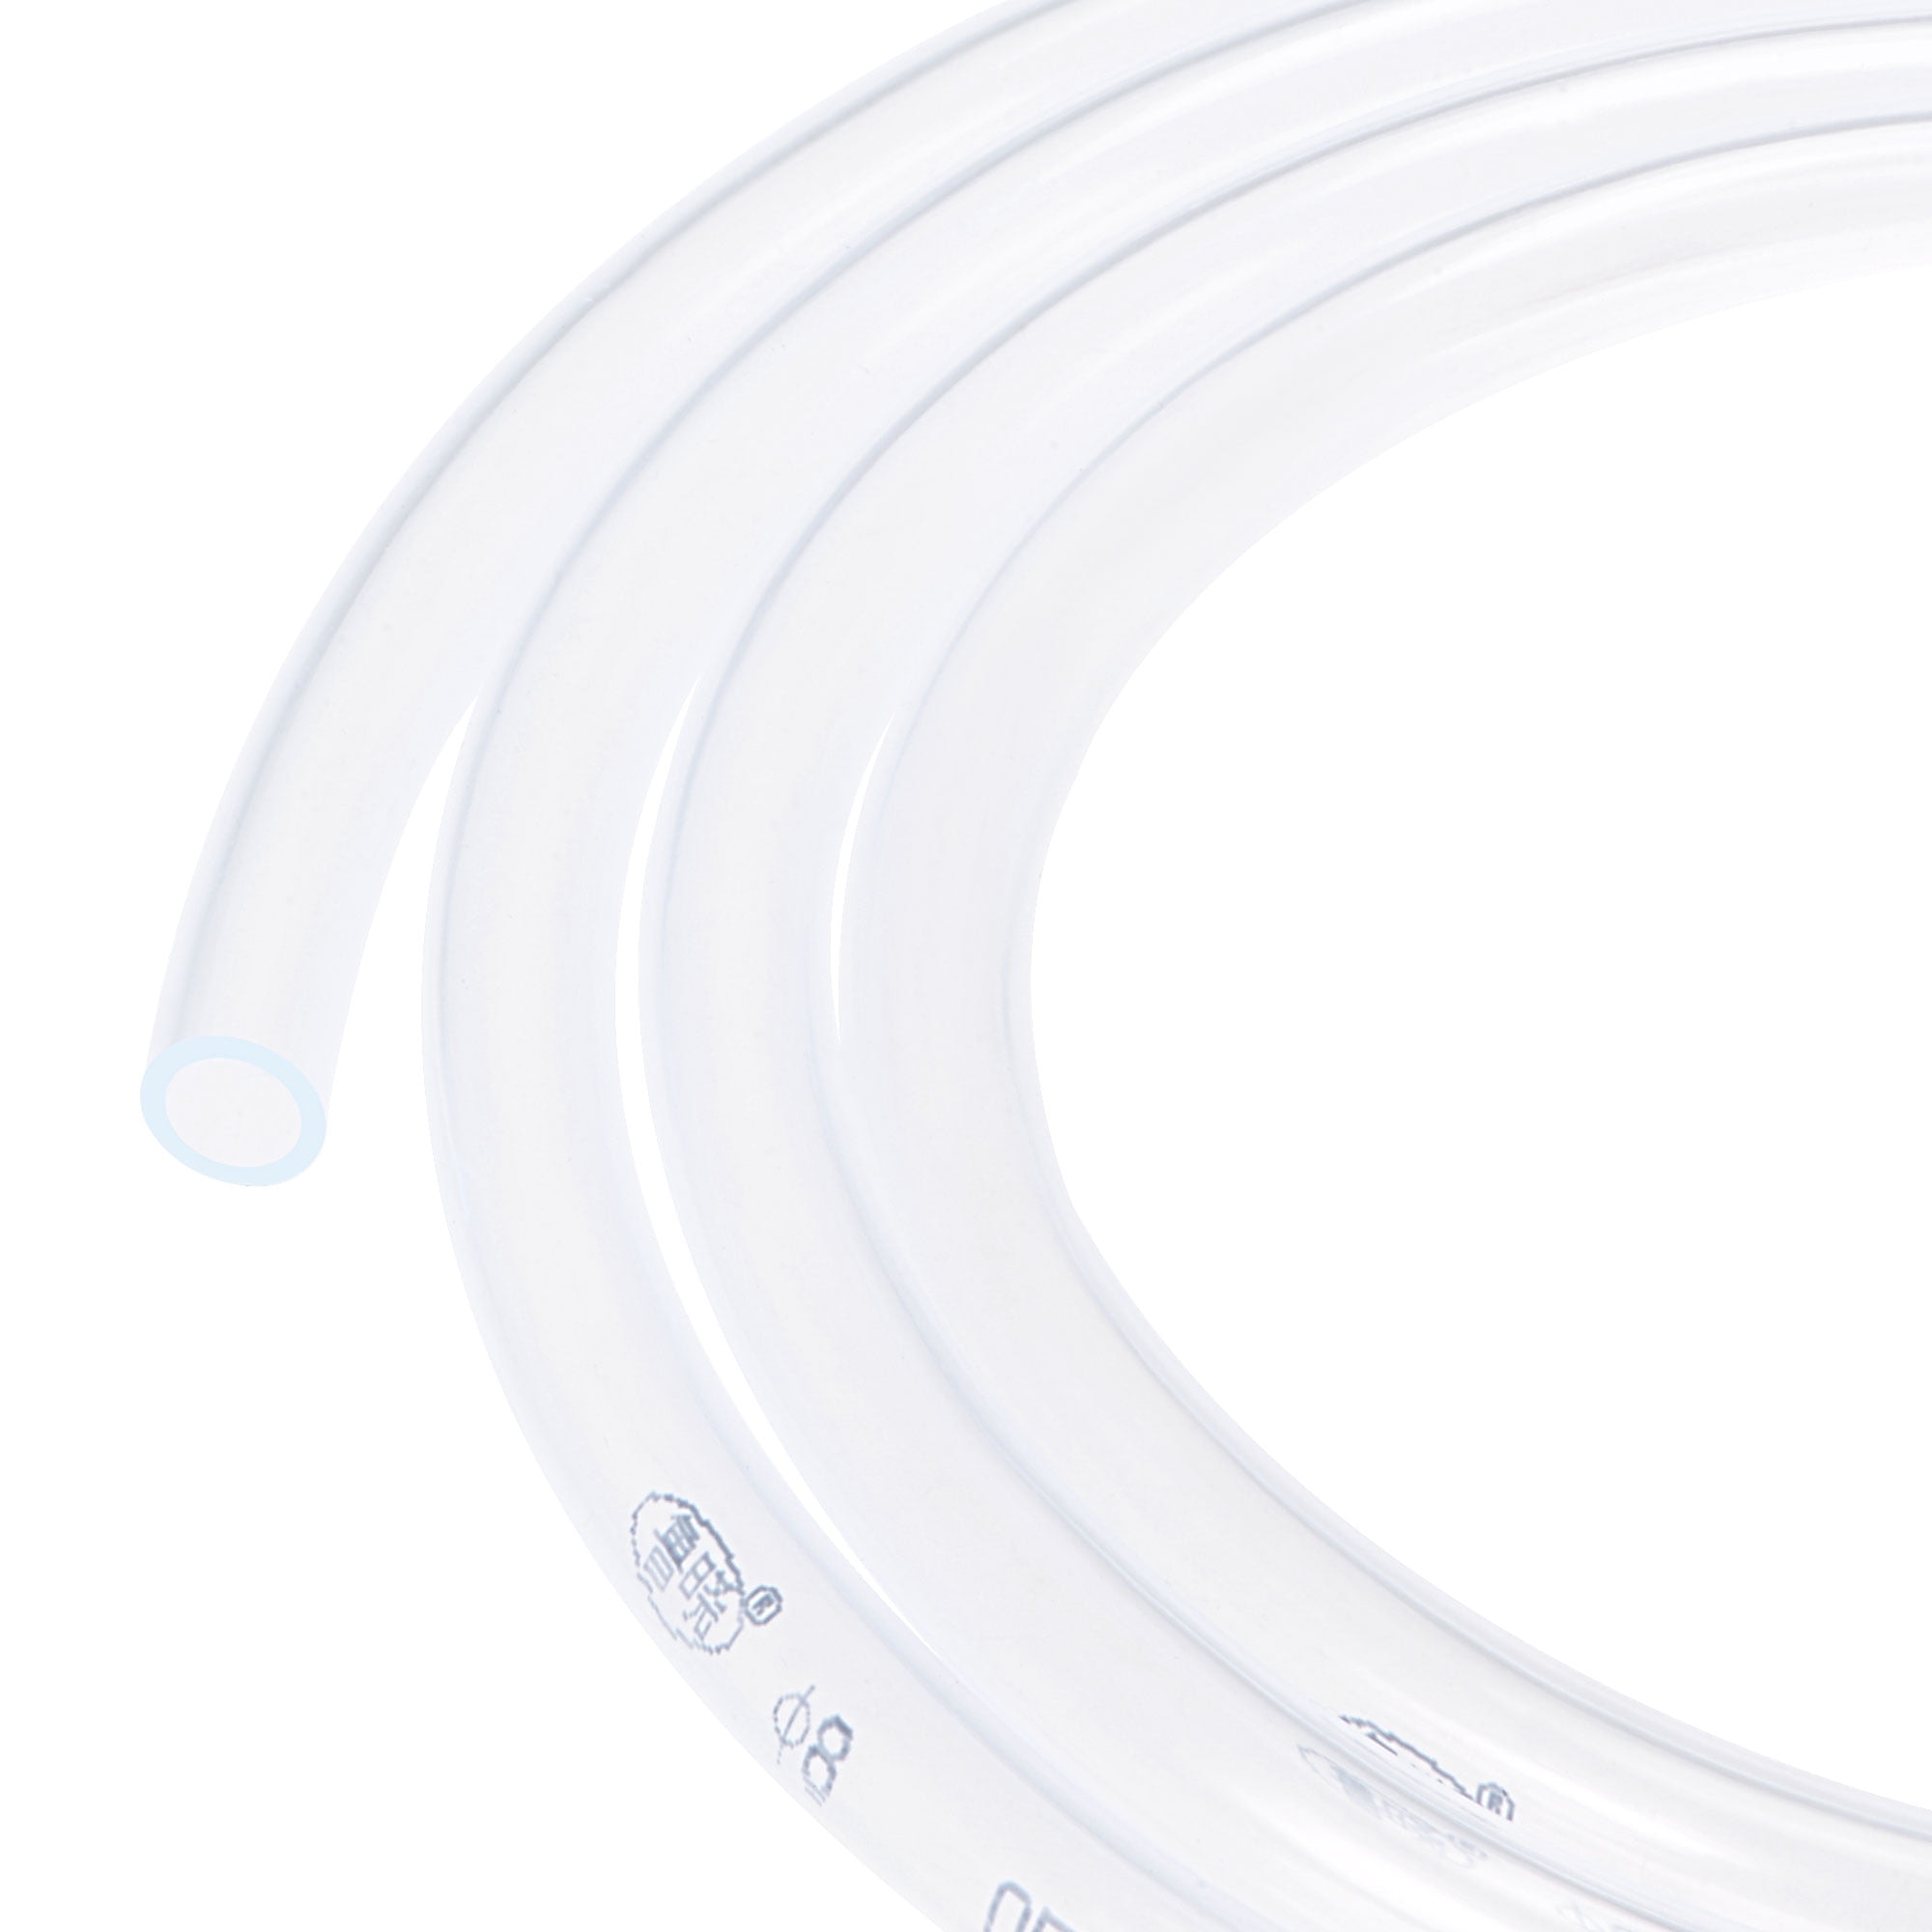 6mmx8mm 2m PVC Vinyl Tubing Clear Tube Plastic Tubing Water Hose Airline, Size: 1/4 x 5/16